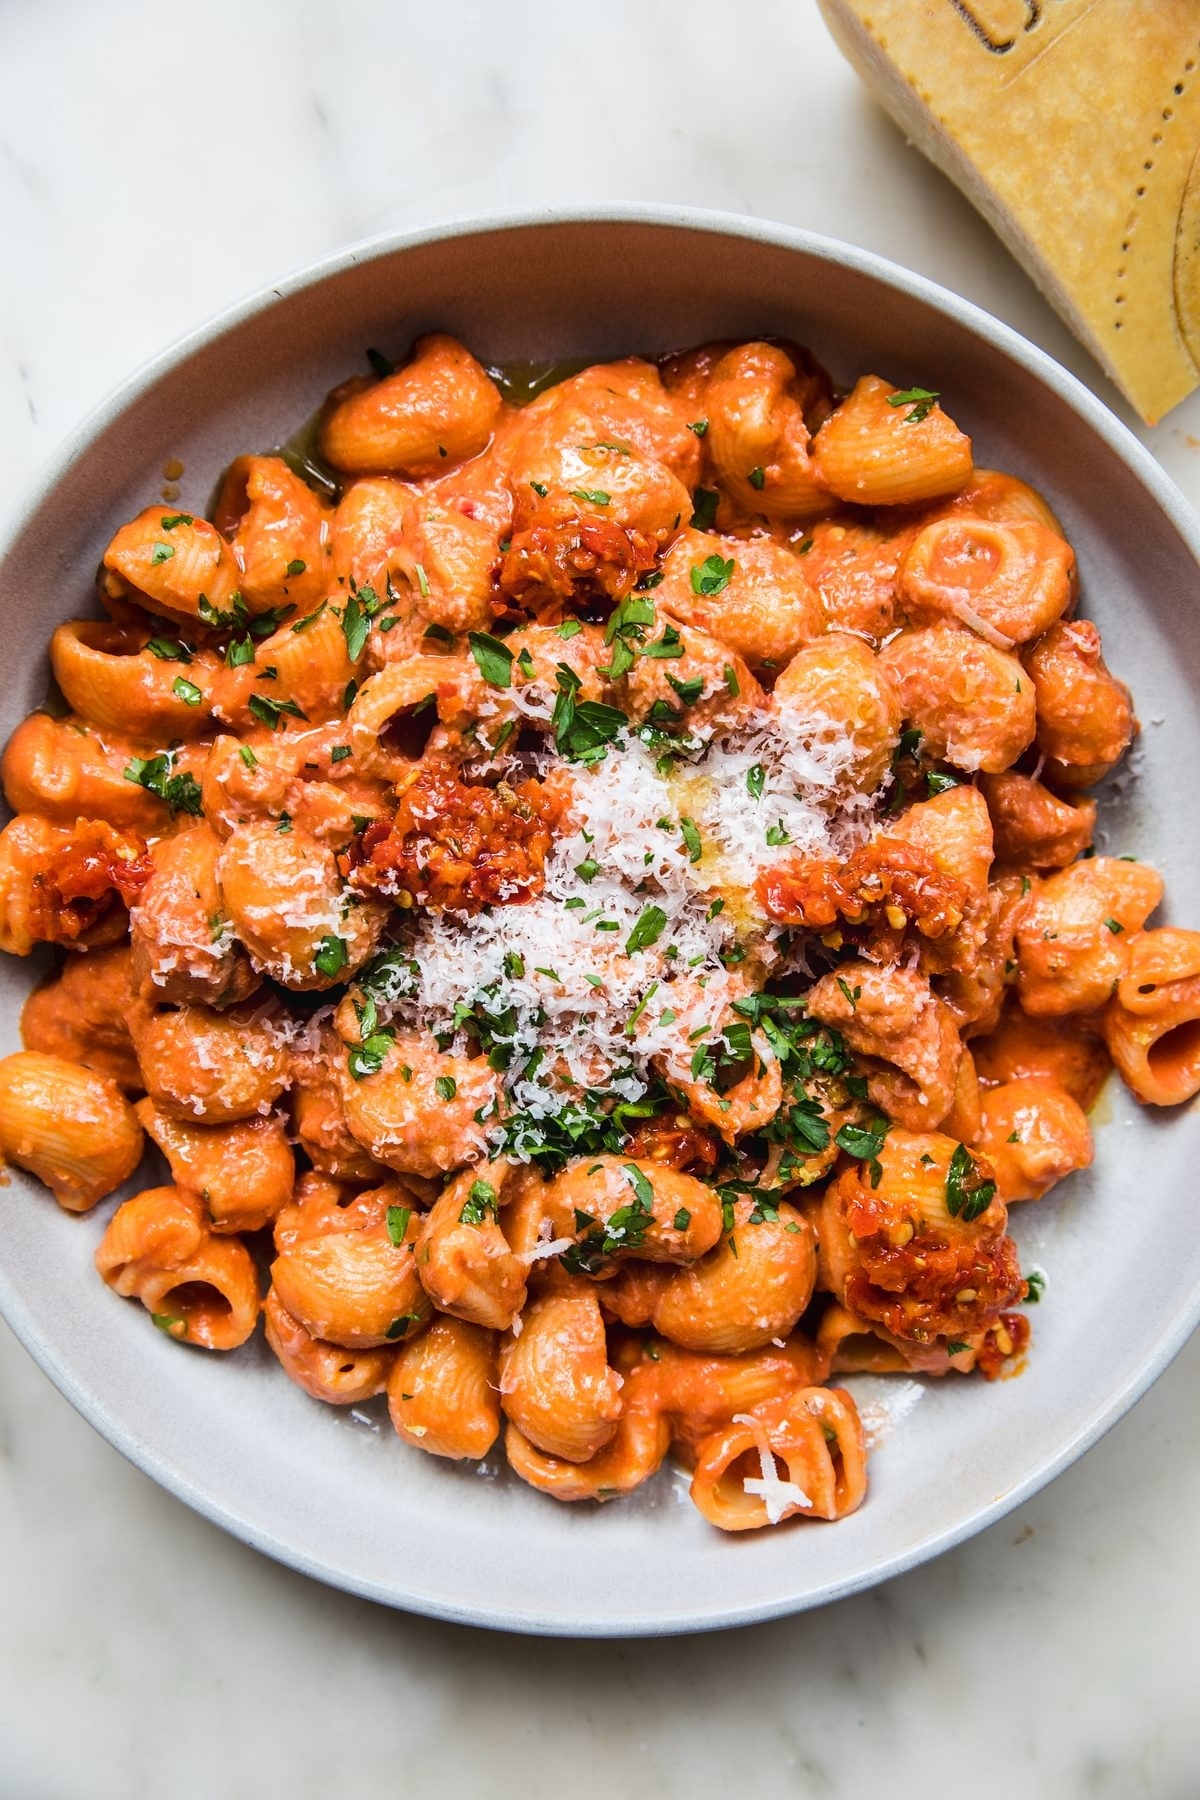 calabrian chilii pasta on a plate topped with parmesan and herbs